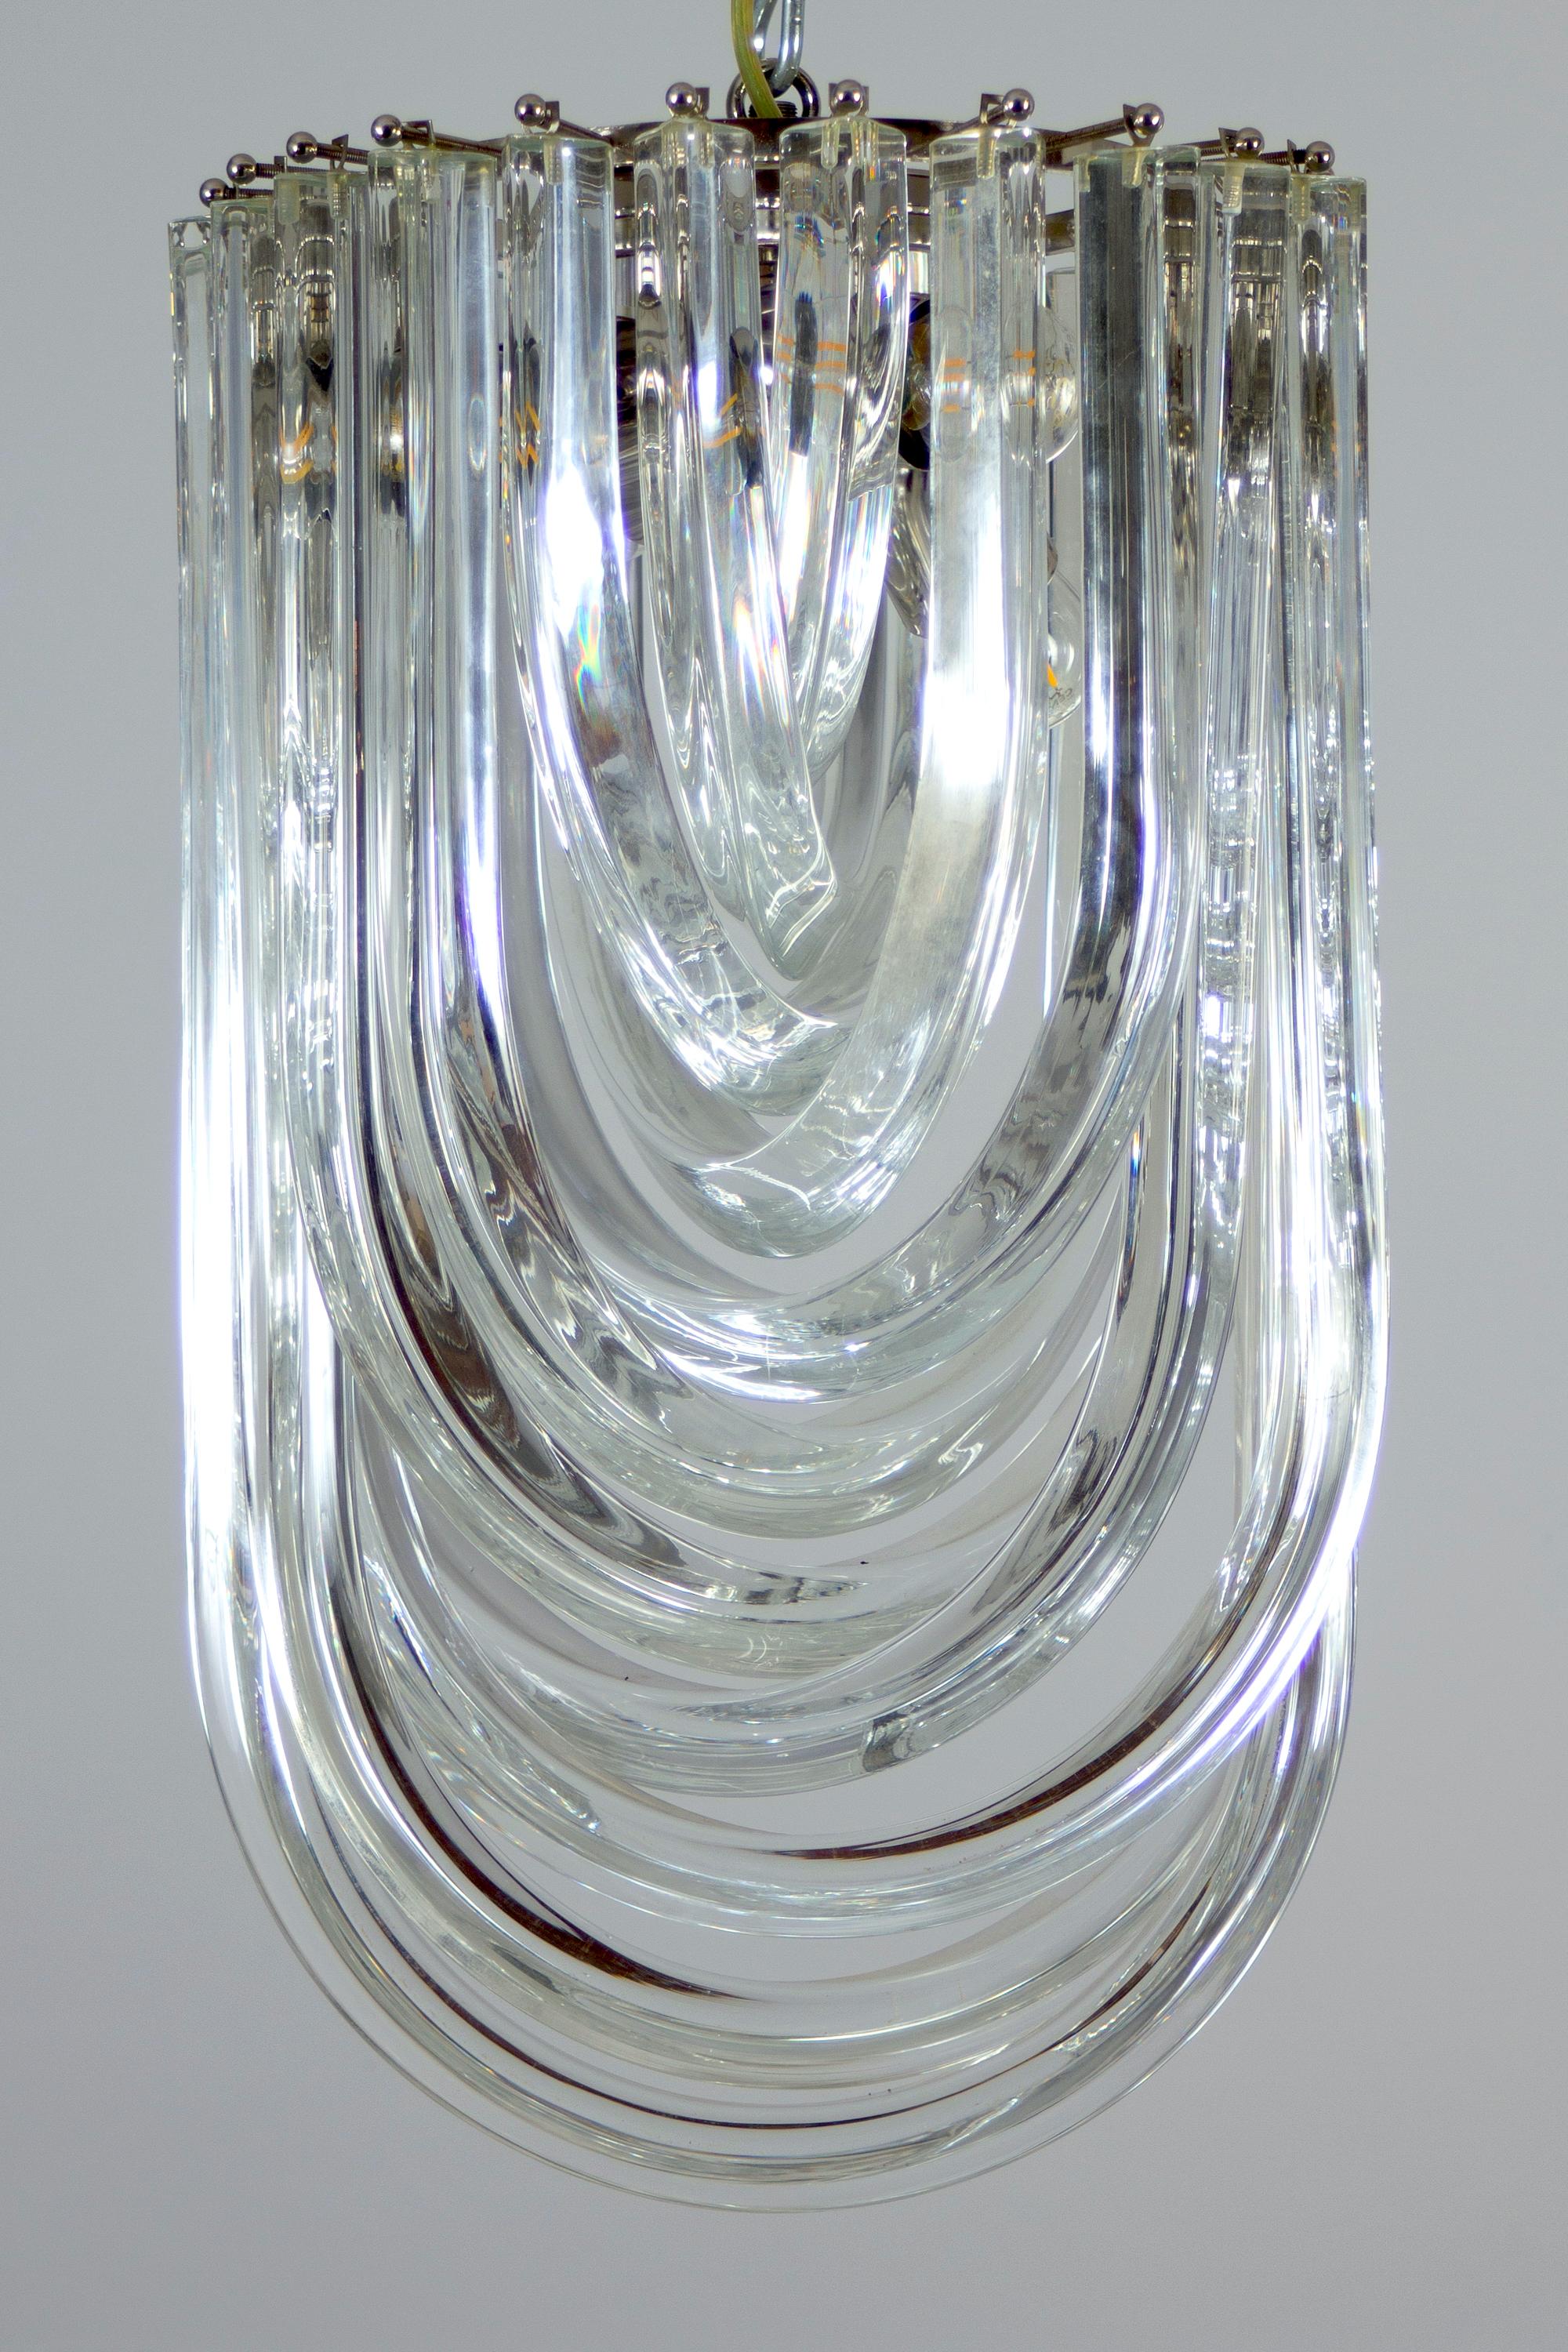 Amazing pair of glass chandelier or ceiling light with four layers of curving “triedri” glass prisms on a brass frame, designed by Carlo Nason for Venini, Italy.
A dynamic form, changing as you move around it, due to the overlapping levels of